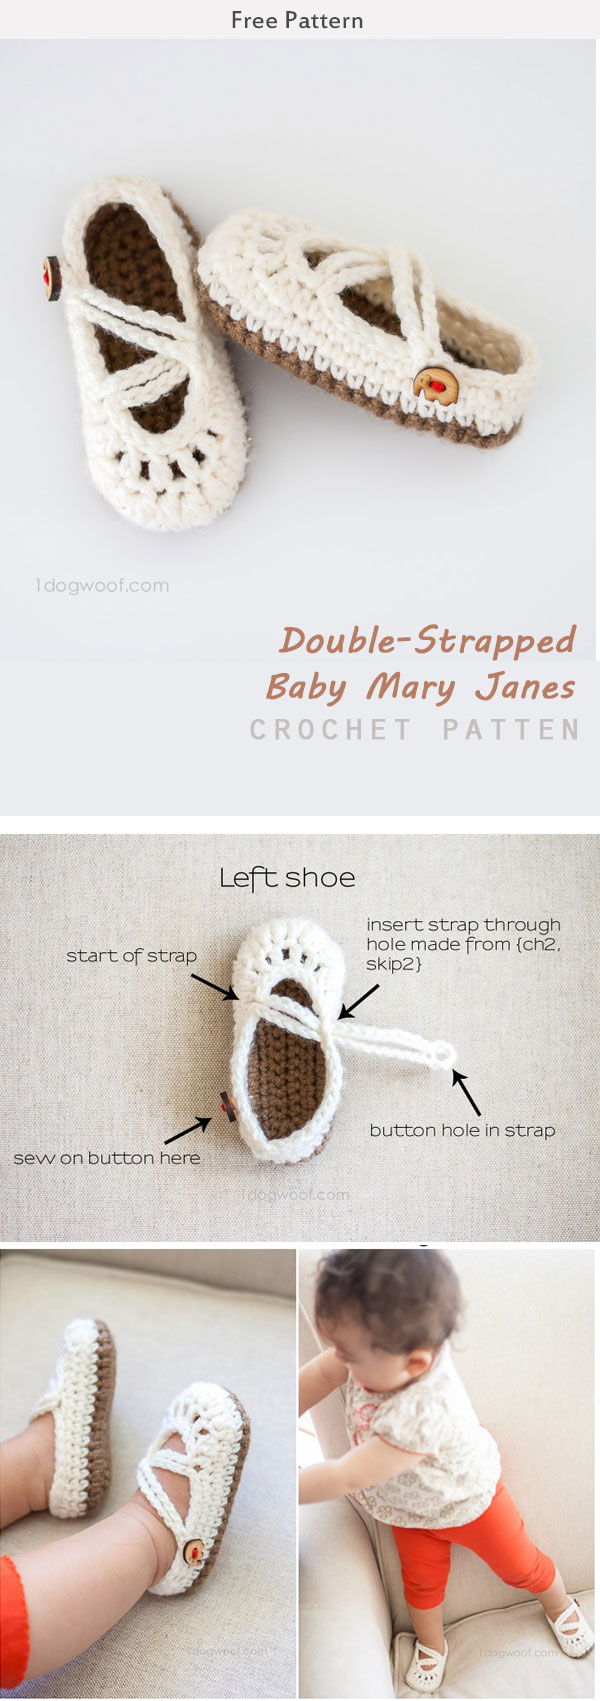  Double-Strapped Baby Mary Janes Crochet Free Pattern